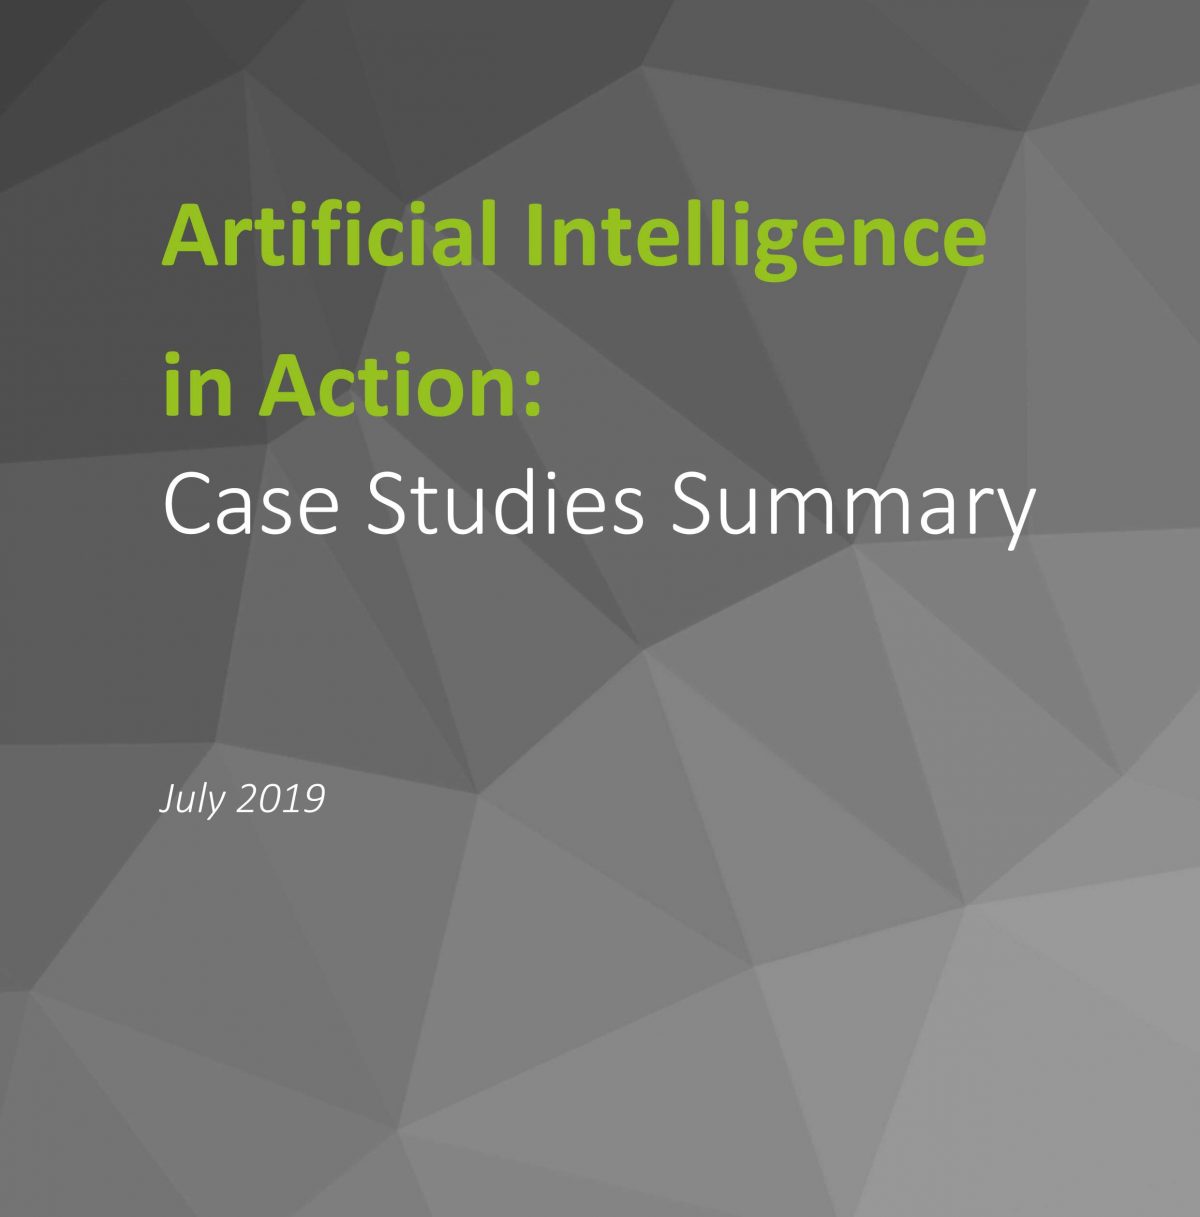 Artificial Intelligence in Action: Case Studies Summary